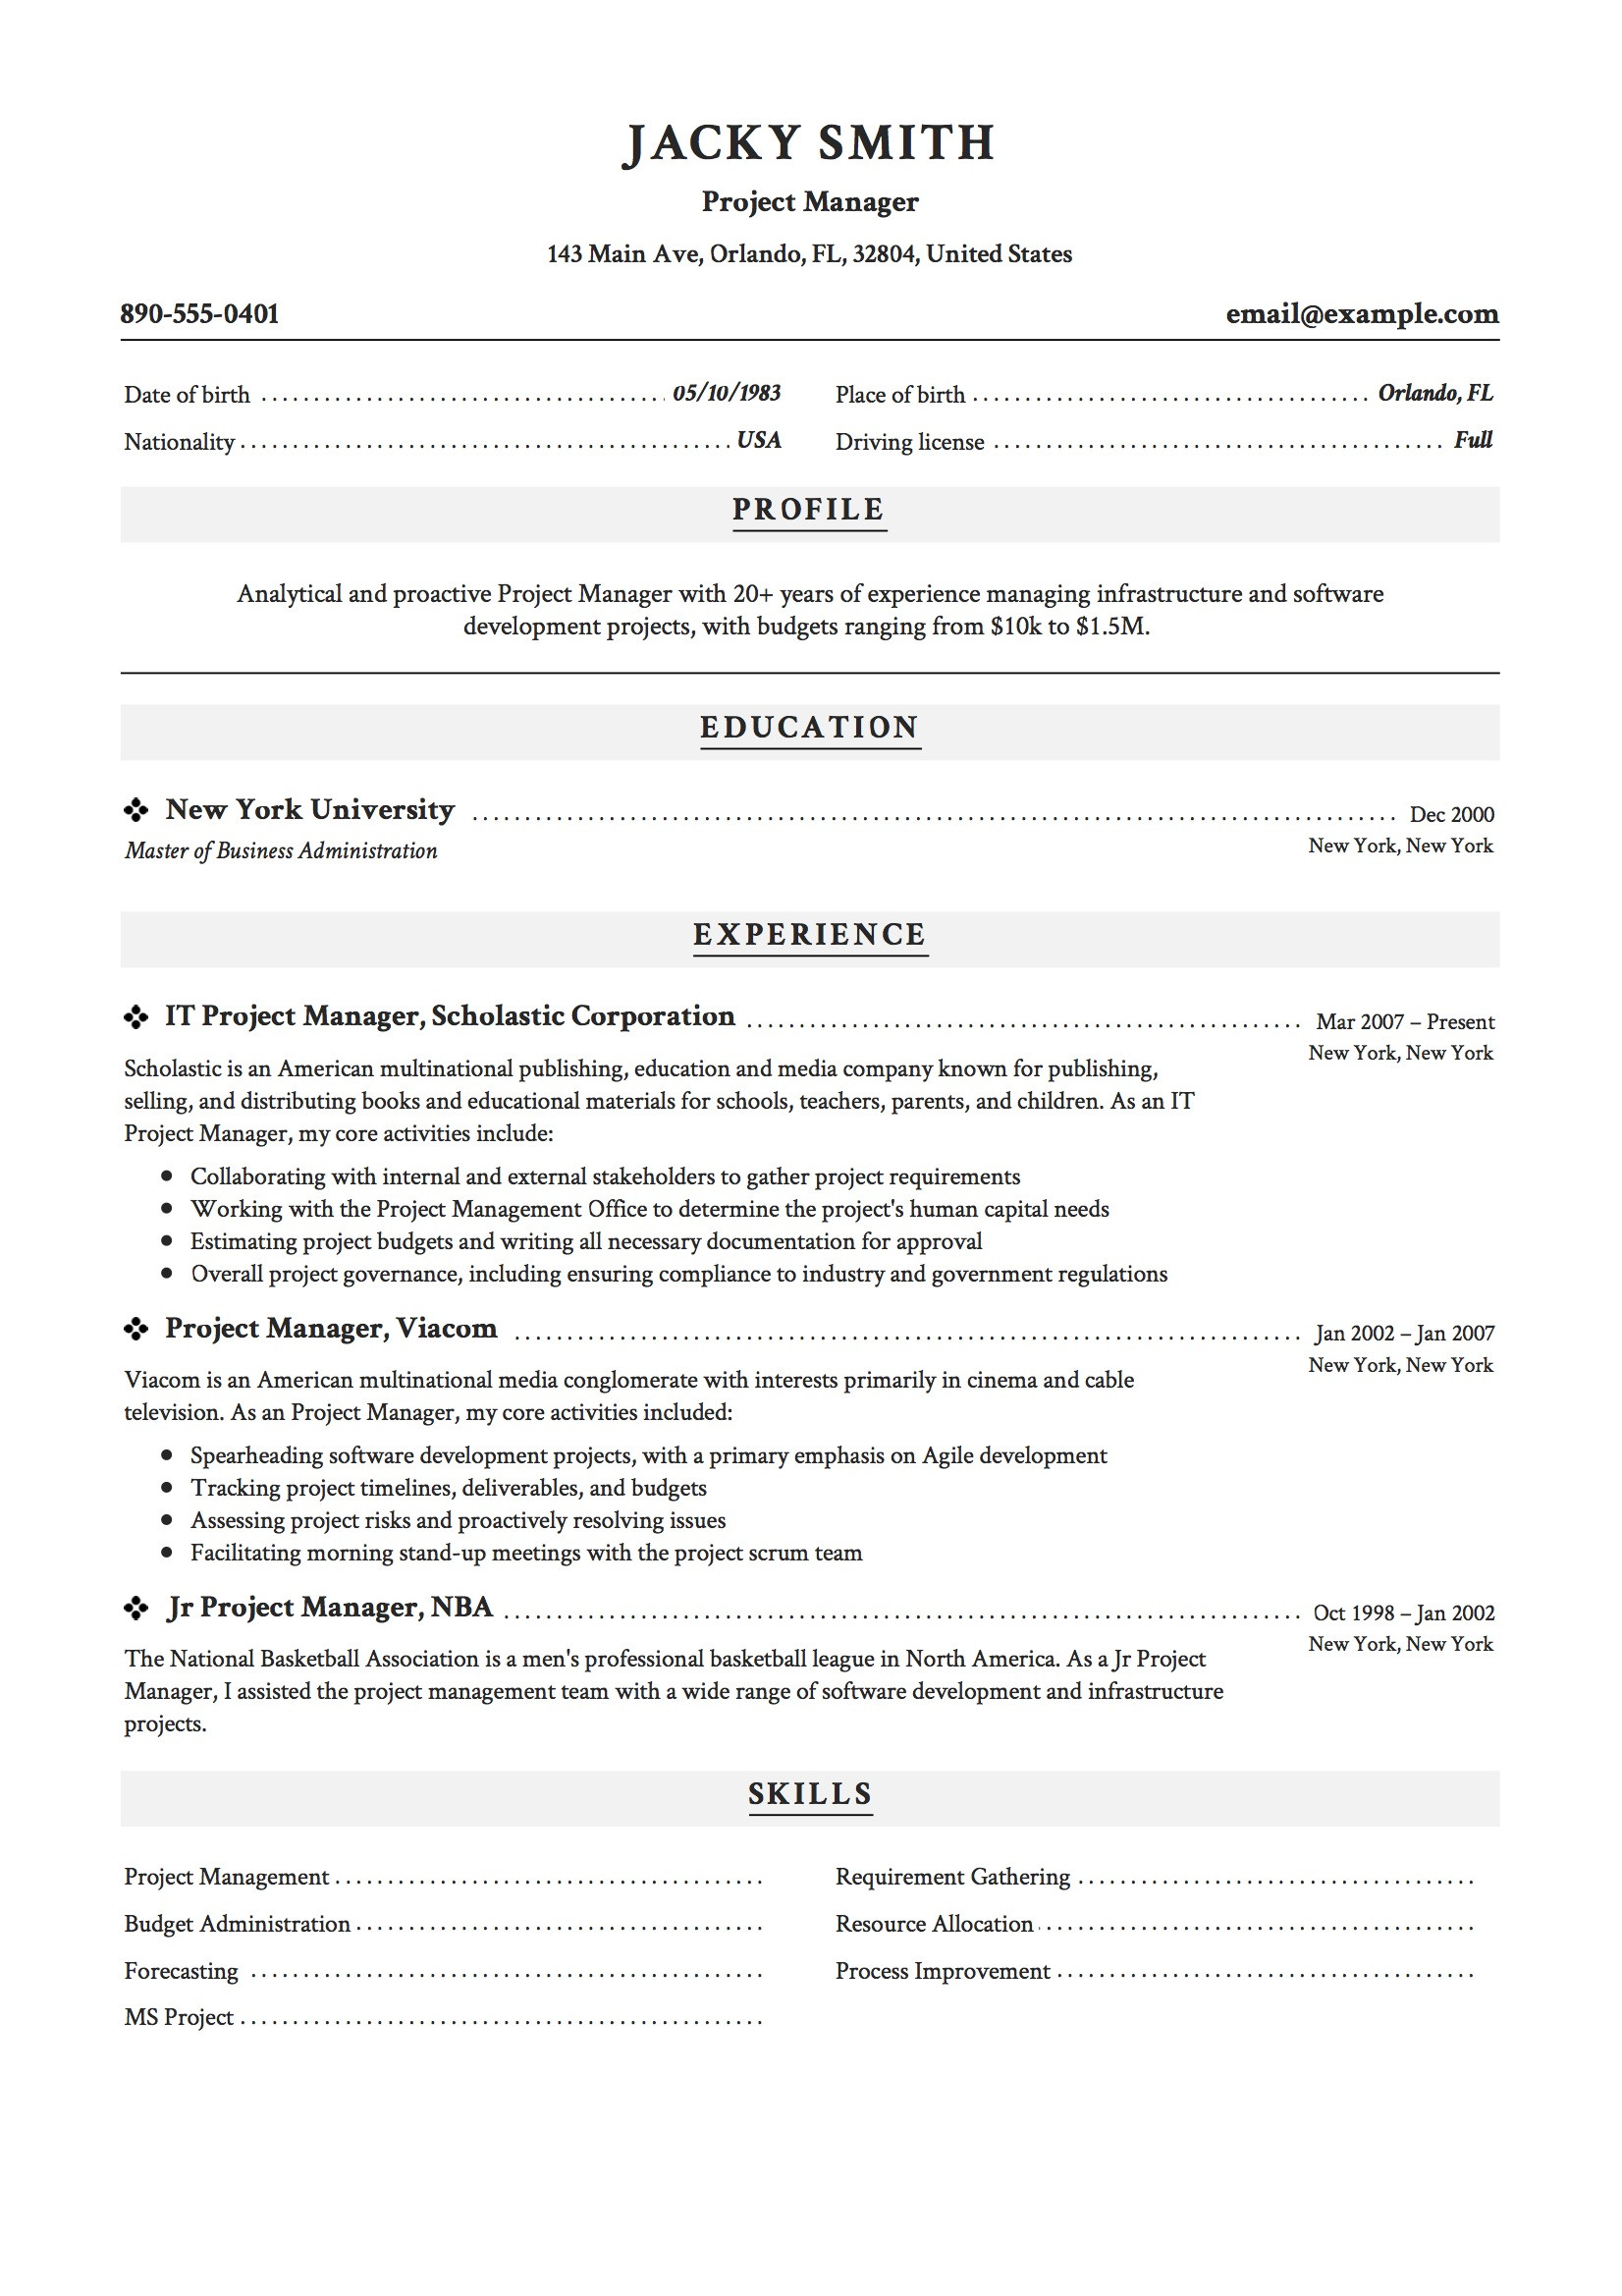 Sample Resumes Hospitality Implementation Project Specialist 20 Project Manager Resumes & Full Guide Pdf & Word